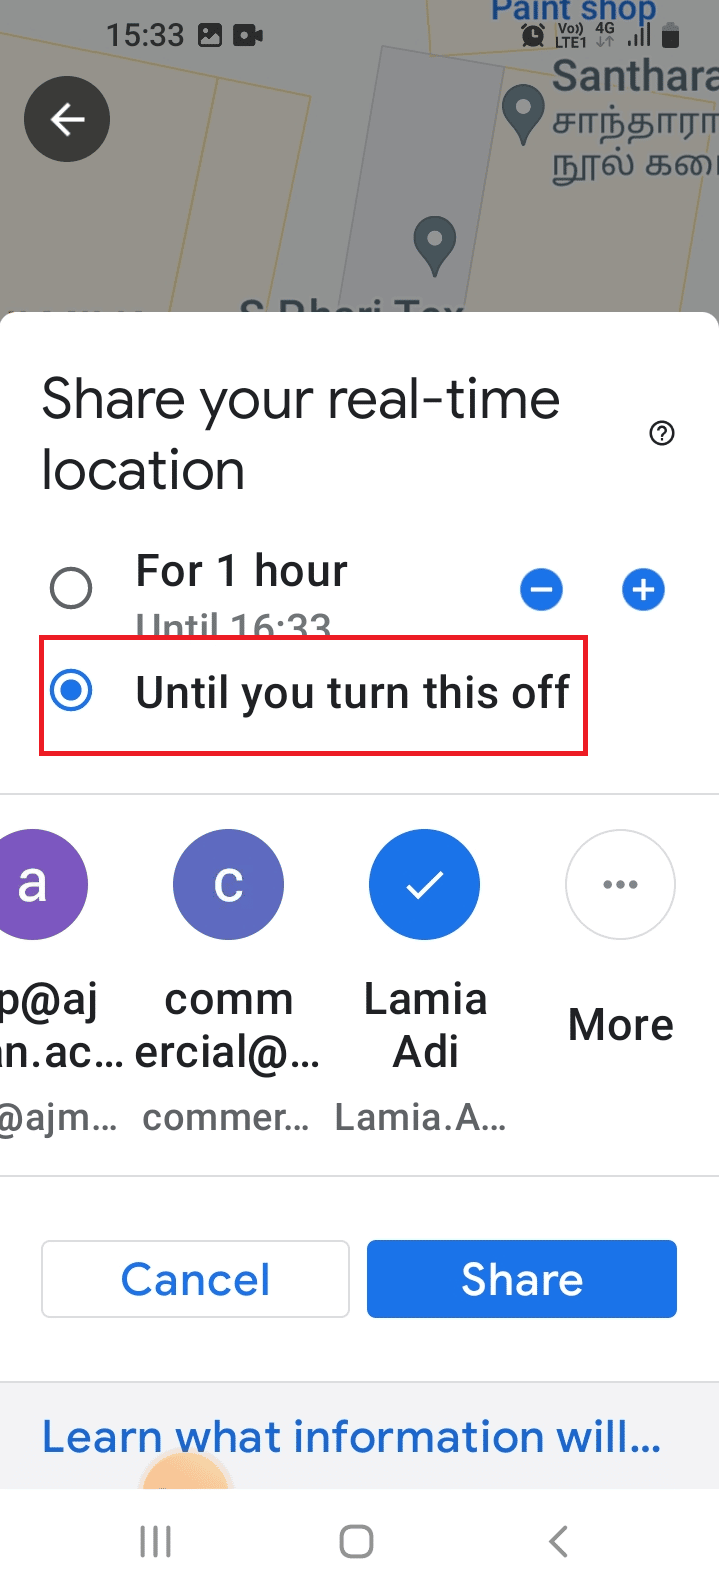 Tap on Until you turn this off option